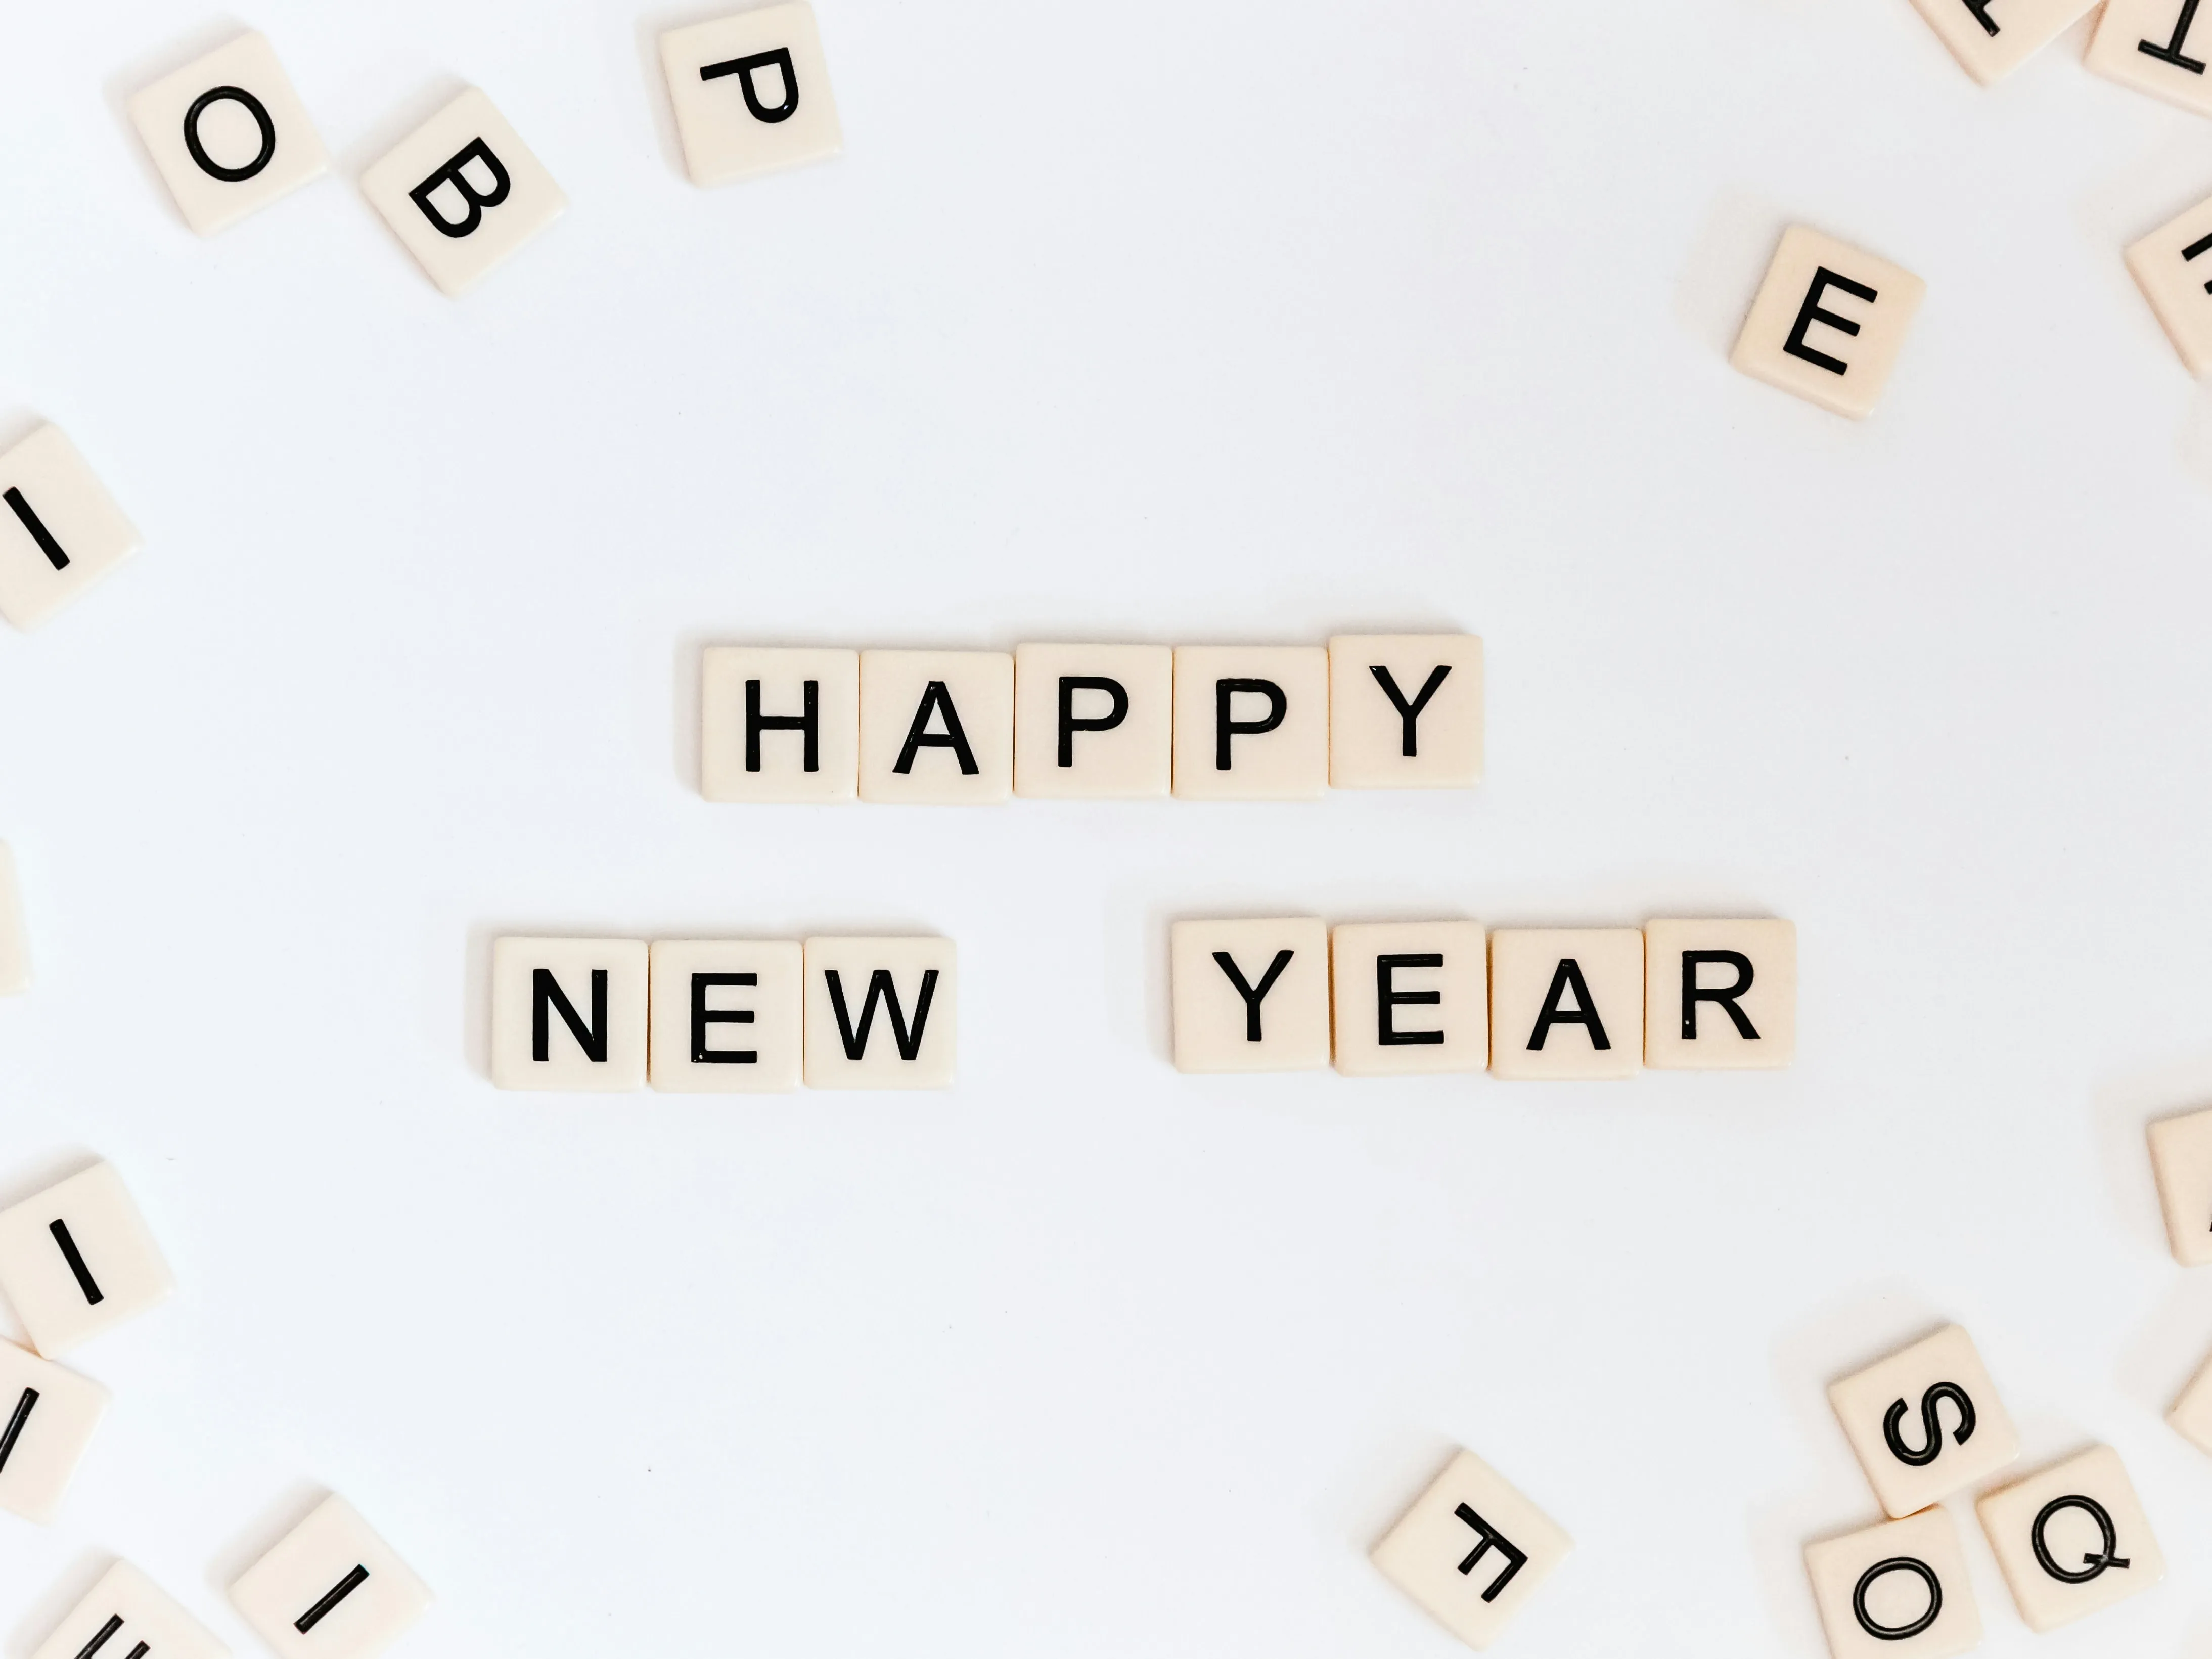 Happy New Year in Scrabble pieces